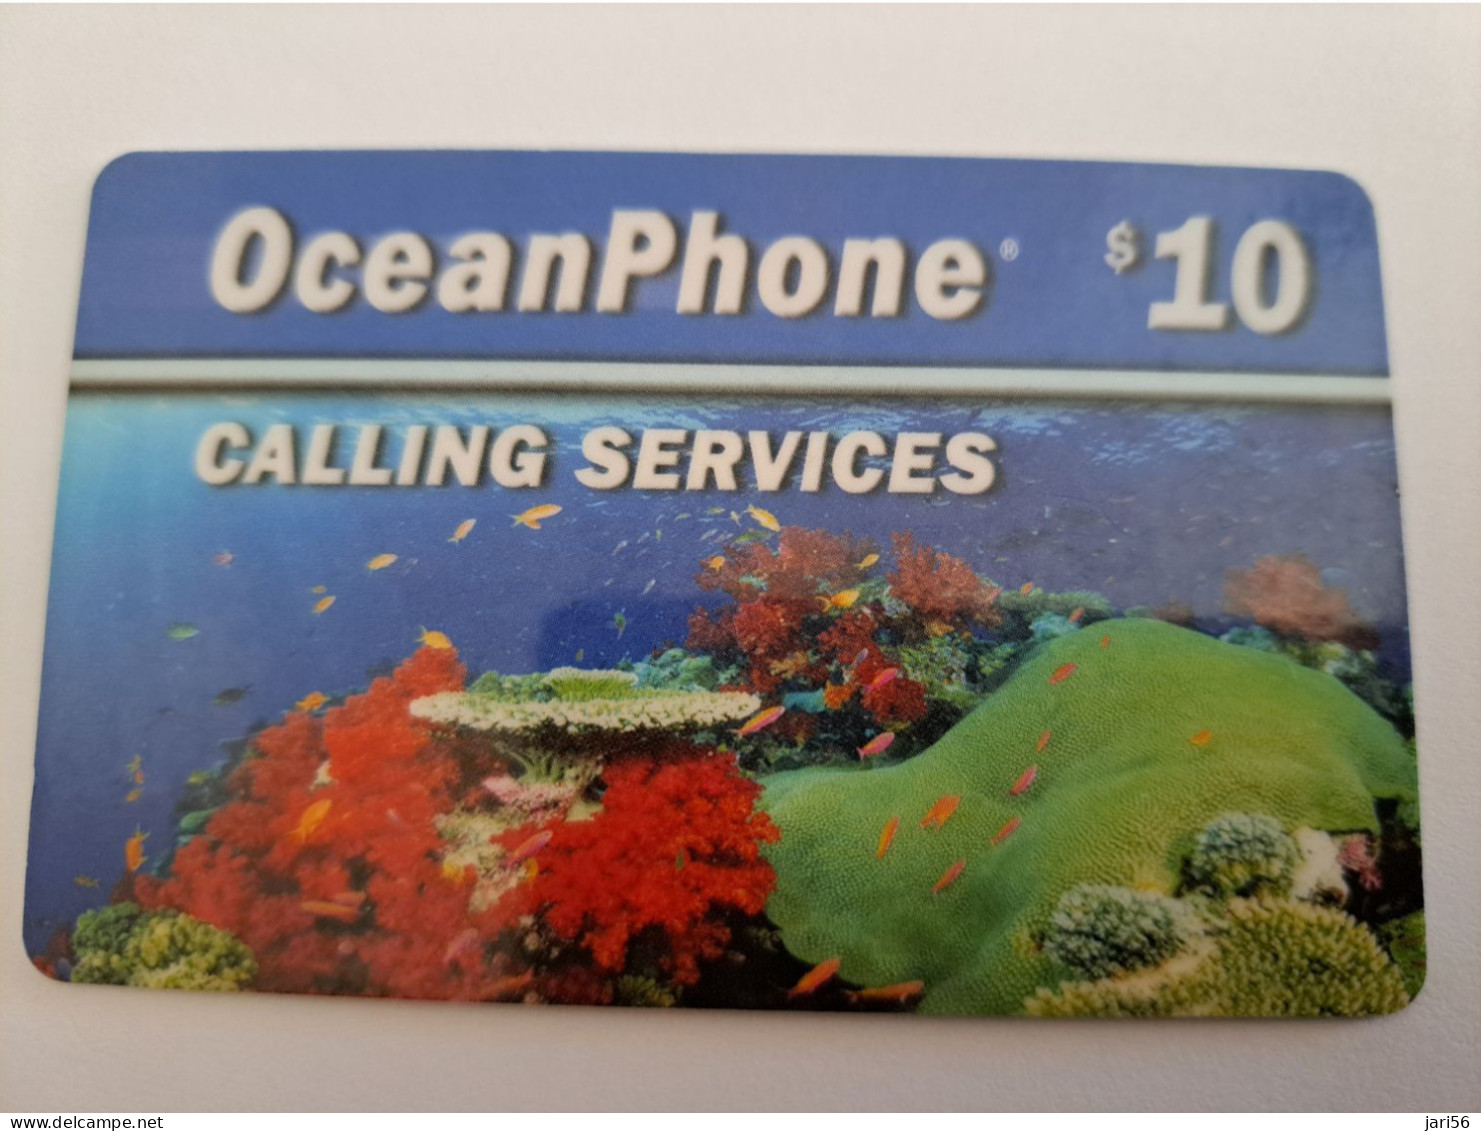 PACIFIC PRE PAID  OCEANPHONE / THICK SERIAL NR /  CALLING SERVICE  FROM SHIP  CORAL REEF /  $10,- UNITS USED  ** 14820** - Other - Oceanie